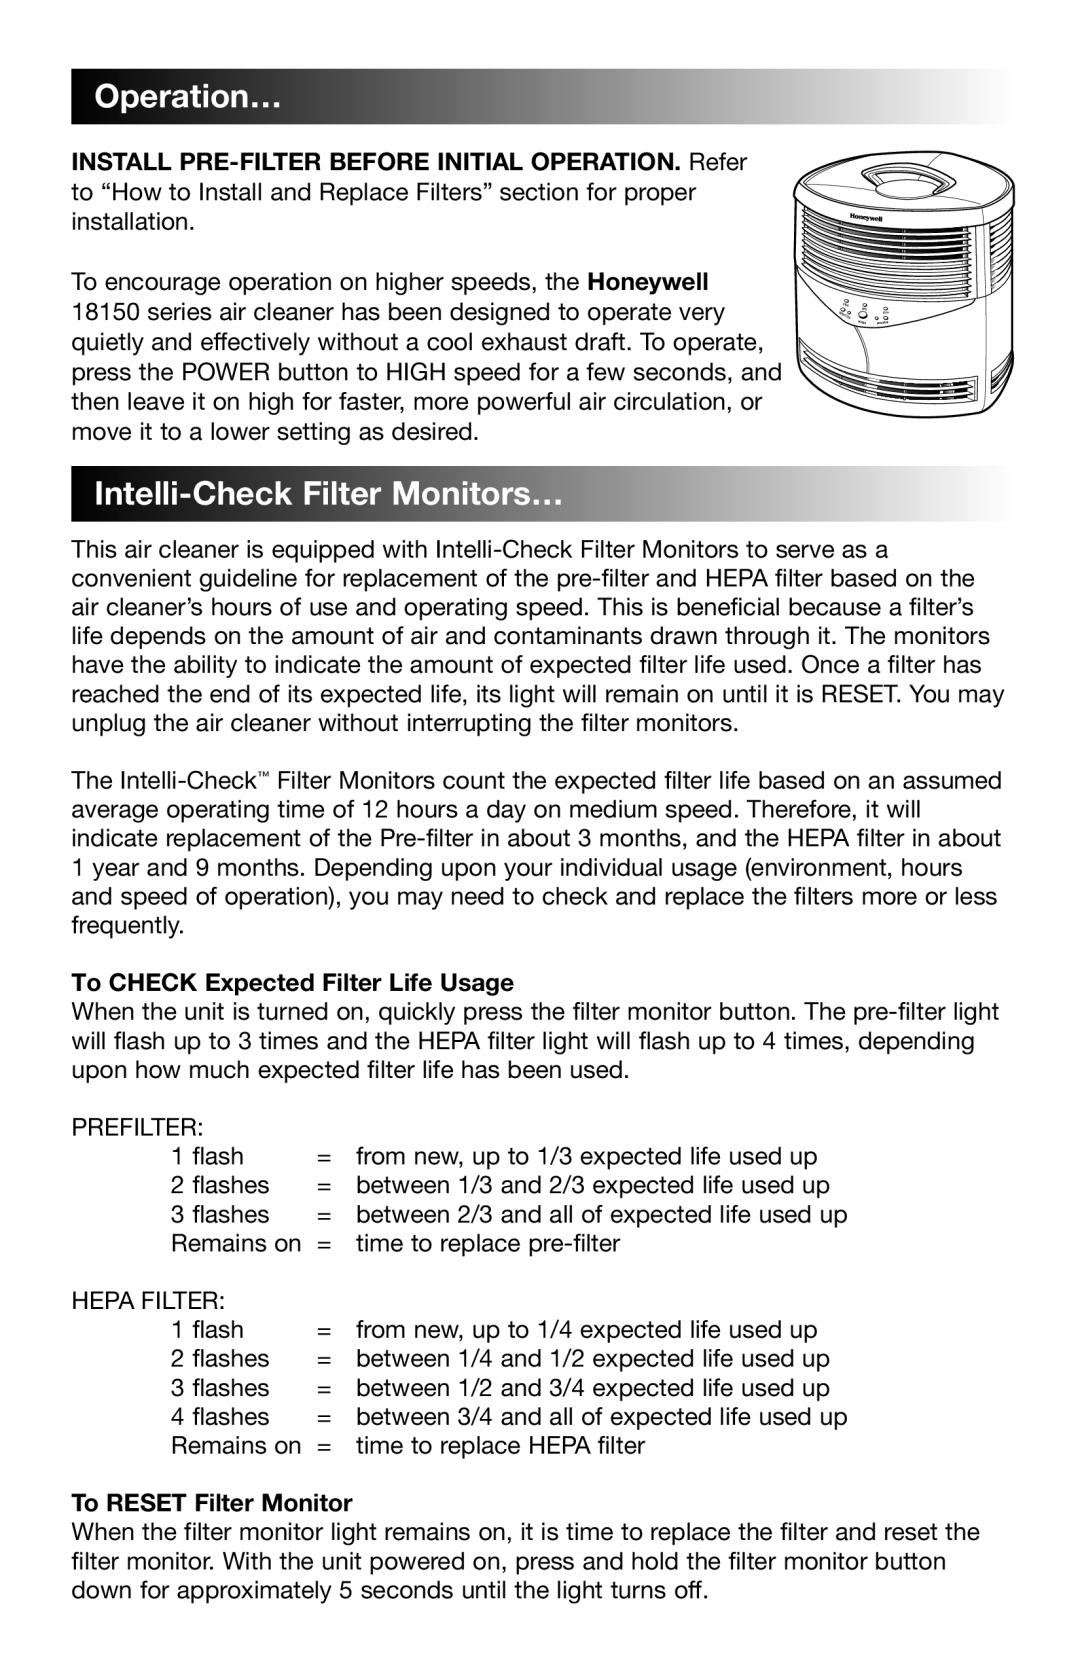 Honeywell 18150 Series owner manual Operation…, Intelli-CheckFilterMonitors…, To CHECK Expected Filter Life Usage 